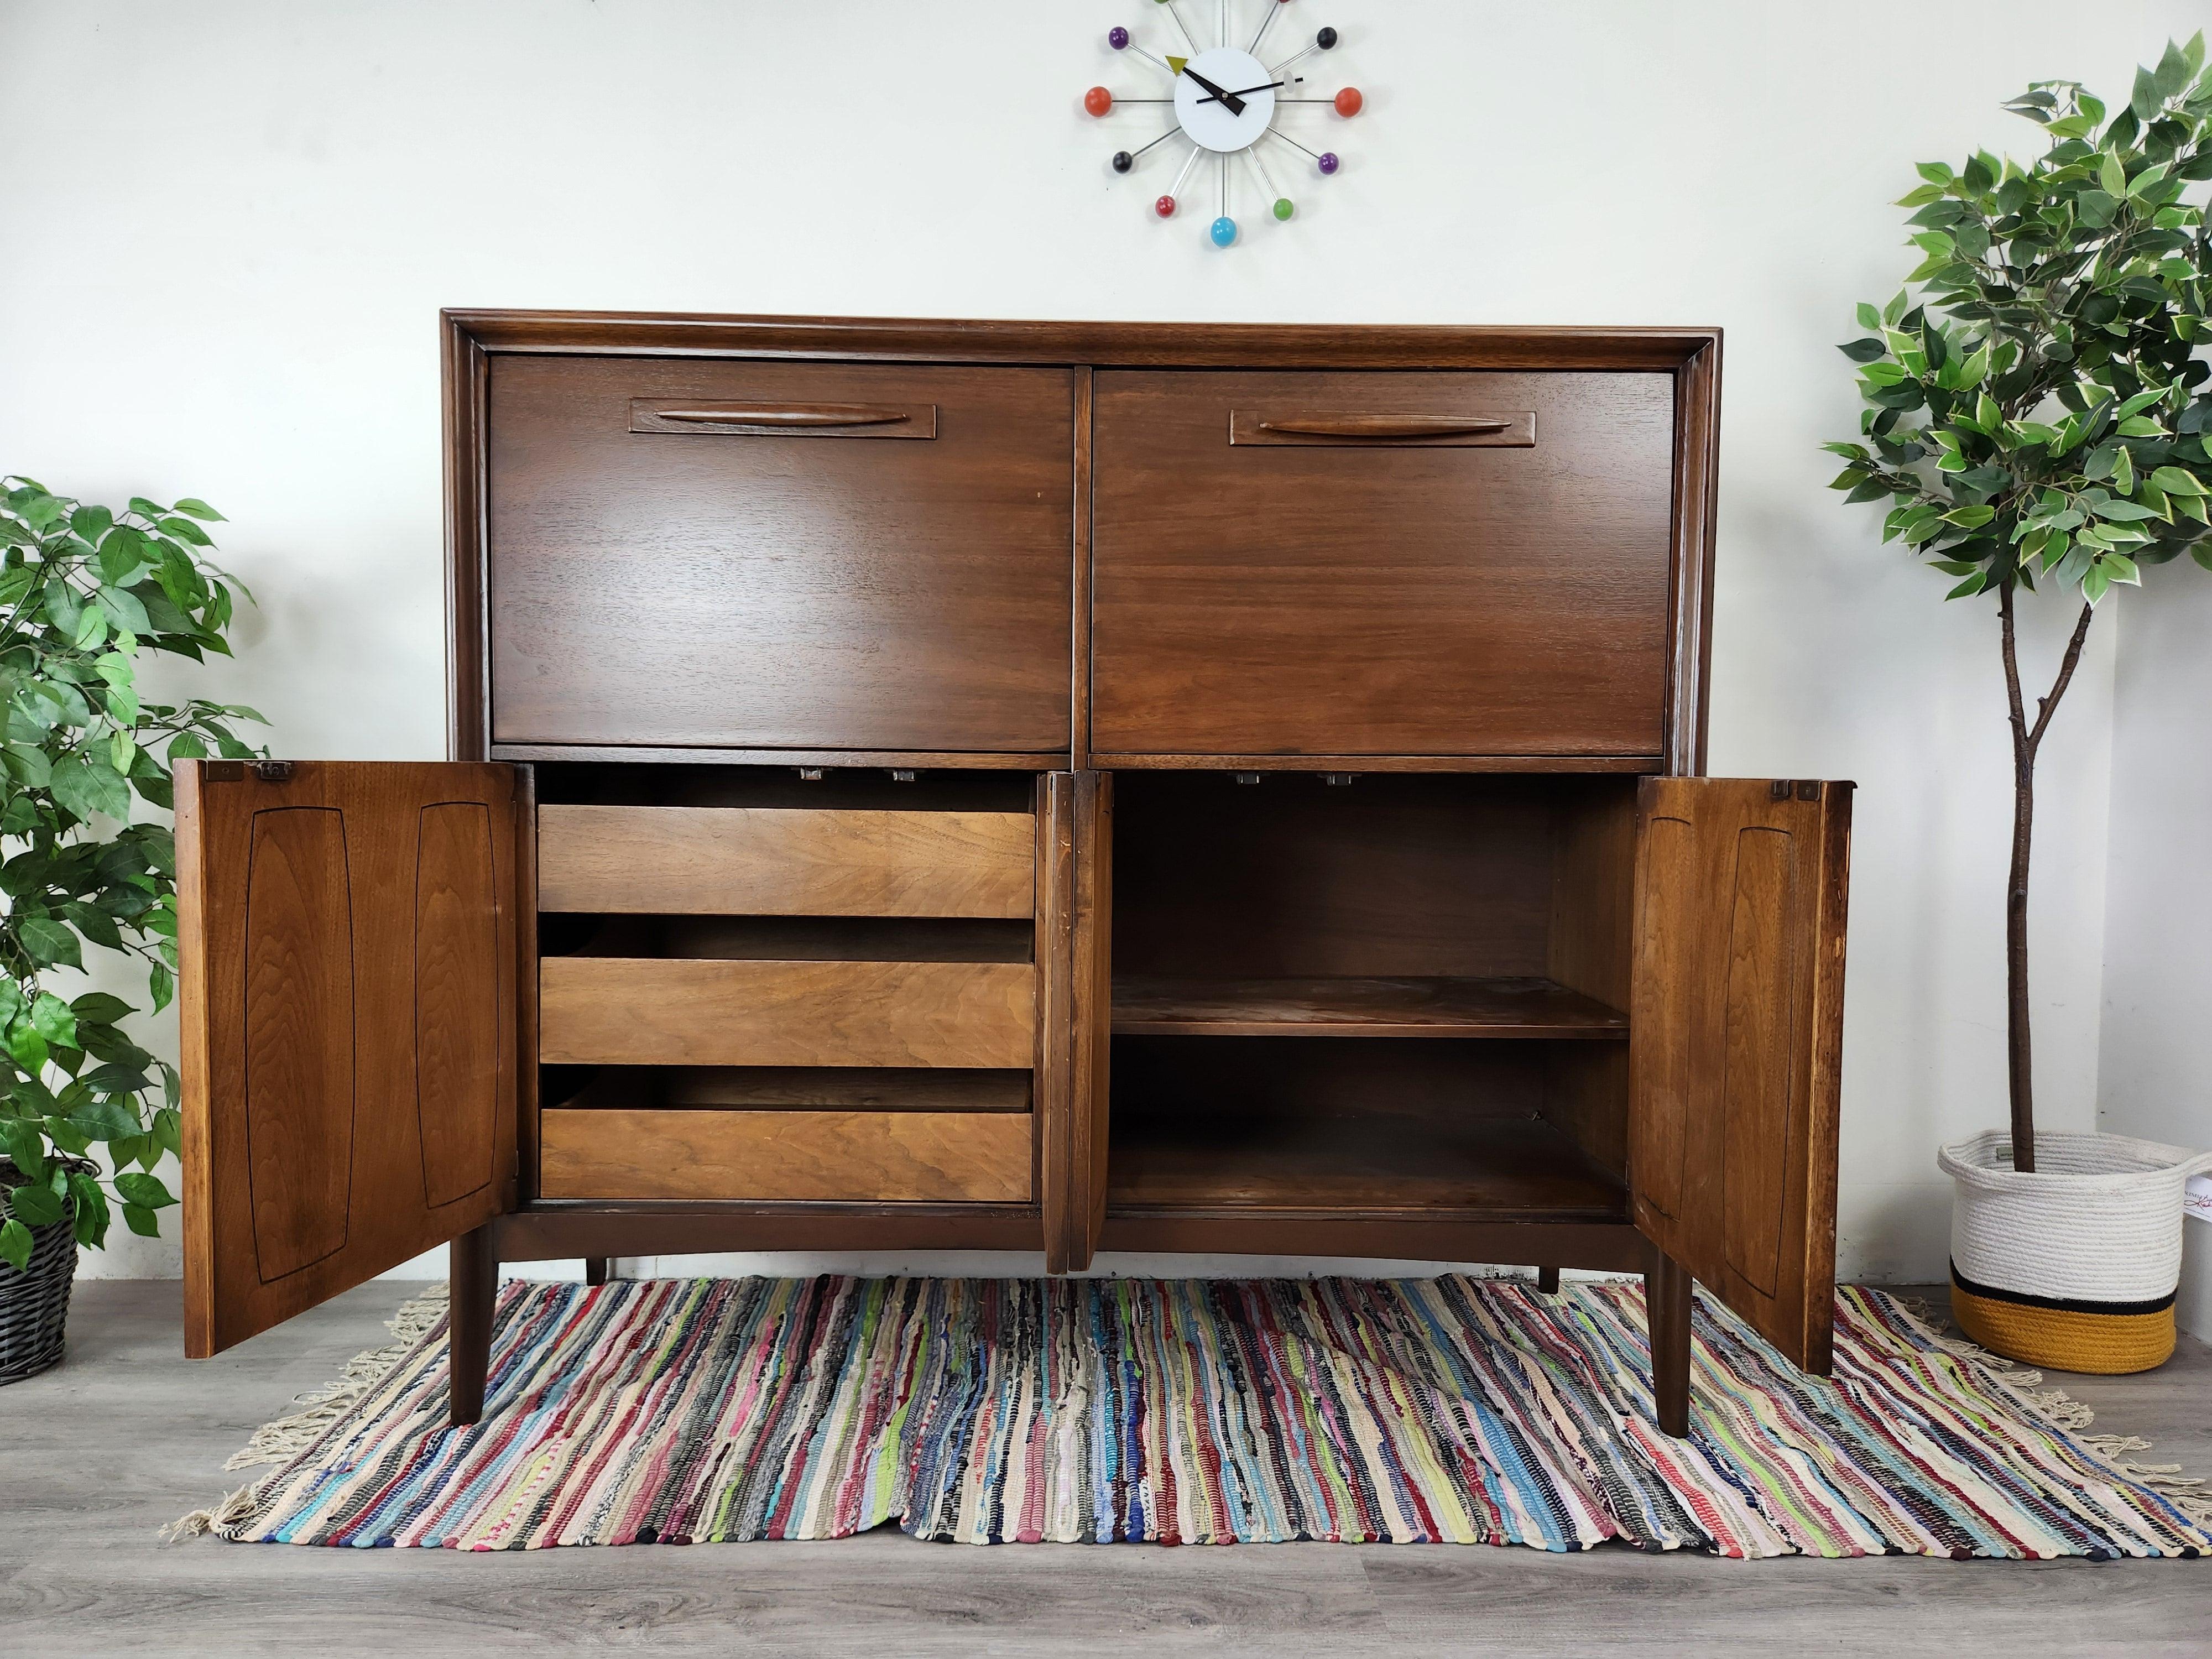 American Broyhill Emphasis Double Bar Cabinet Butlers Pantry Mid-Century Modern  For Sale